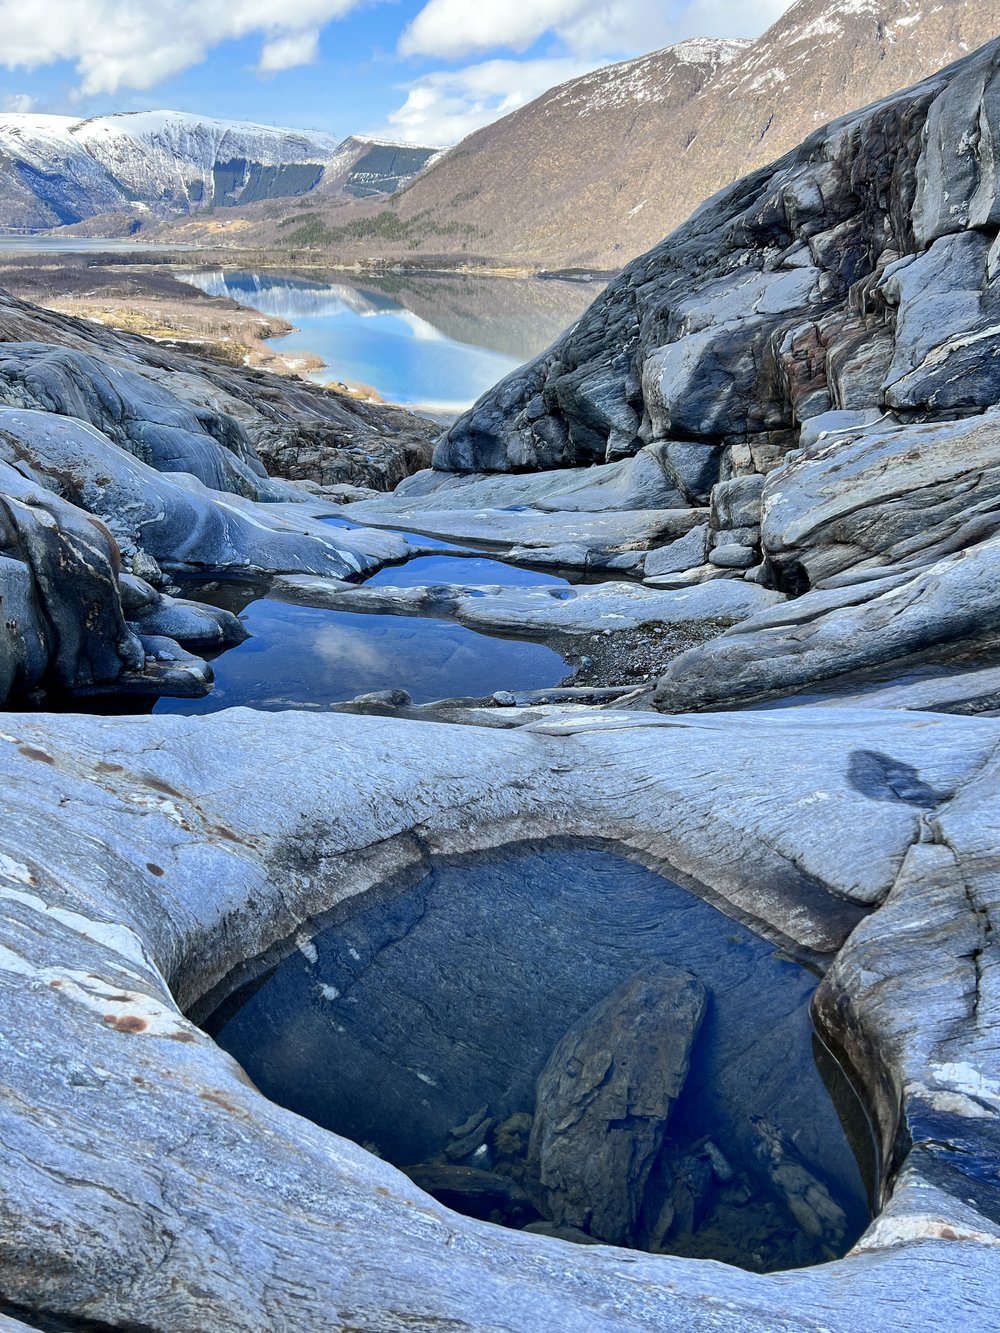  Natural lakes and pools on our way on top of Svartisen glacier. ©Belén Garcia Ovide 